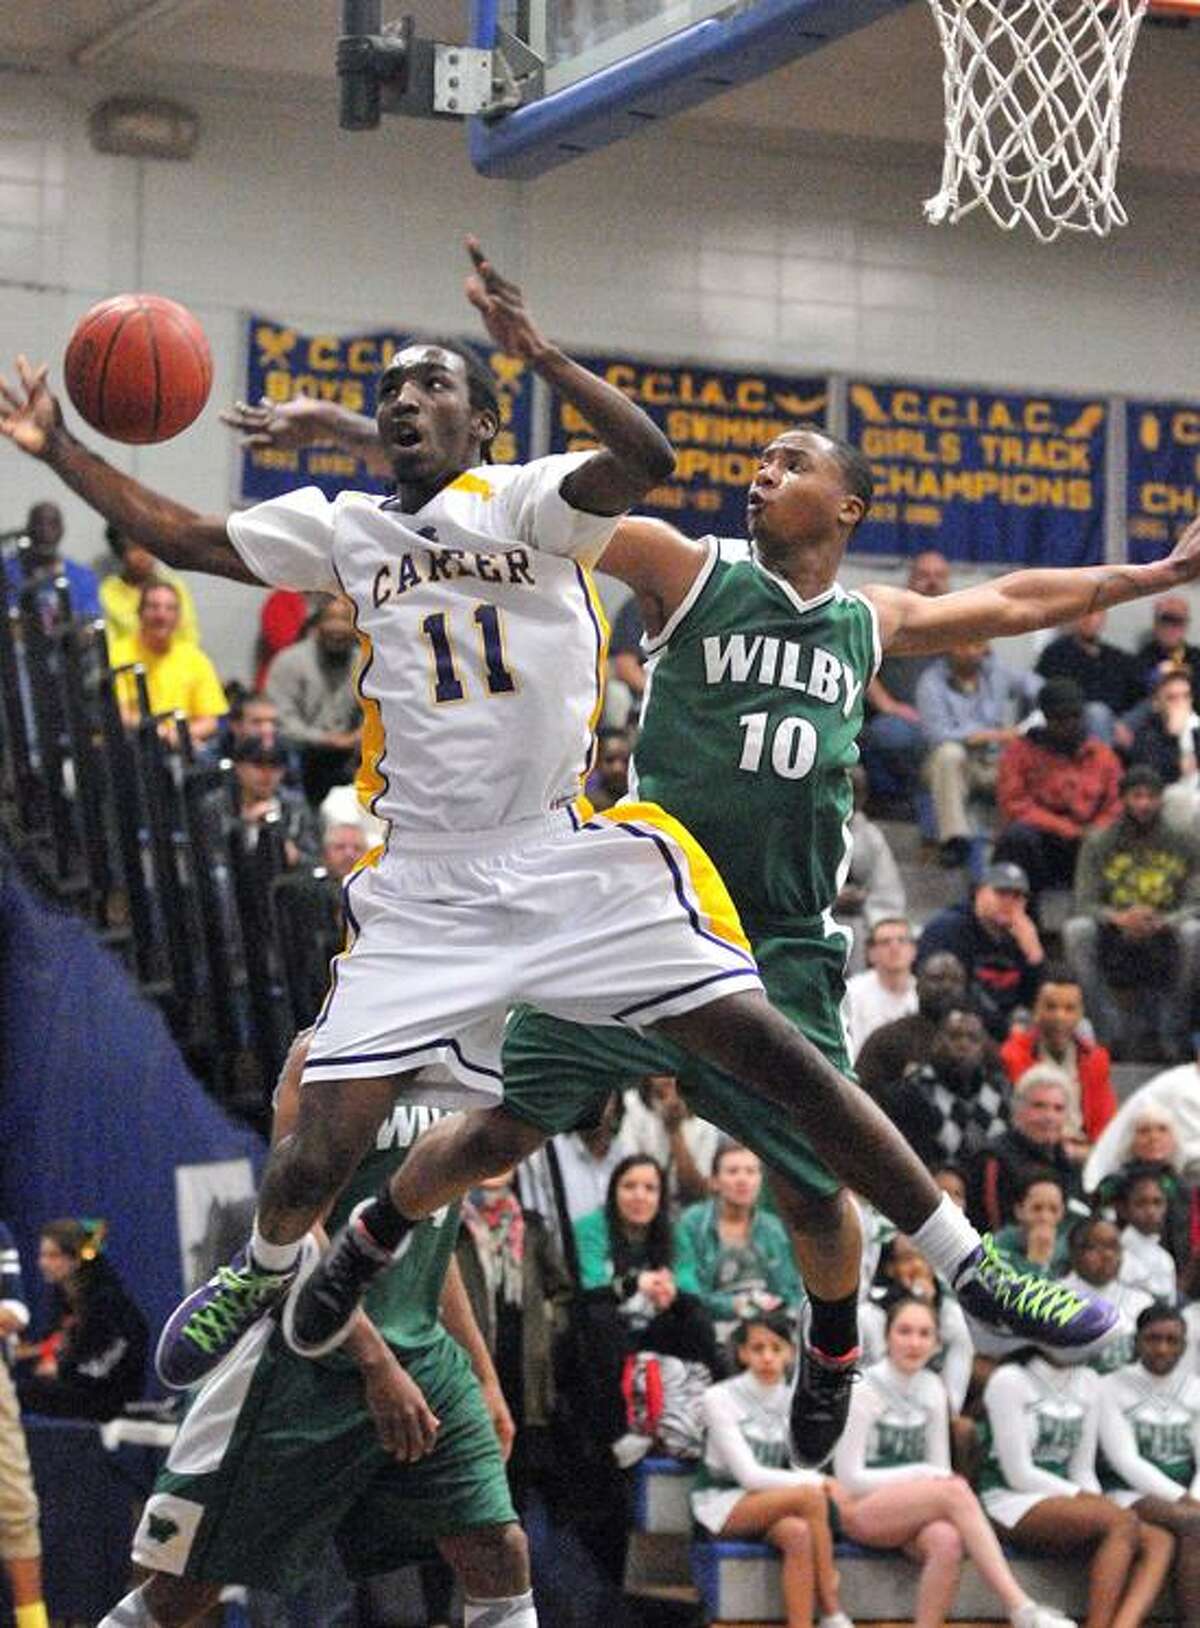 Stratford--Career's Treyvon Moore takes the foul from Wilby's Marcus Robinson during the first half. Photo- Peter Casolino/New Haven Register 03/13/12